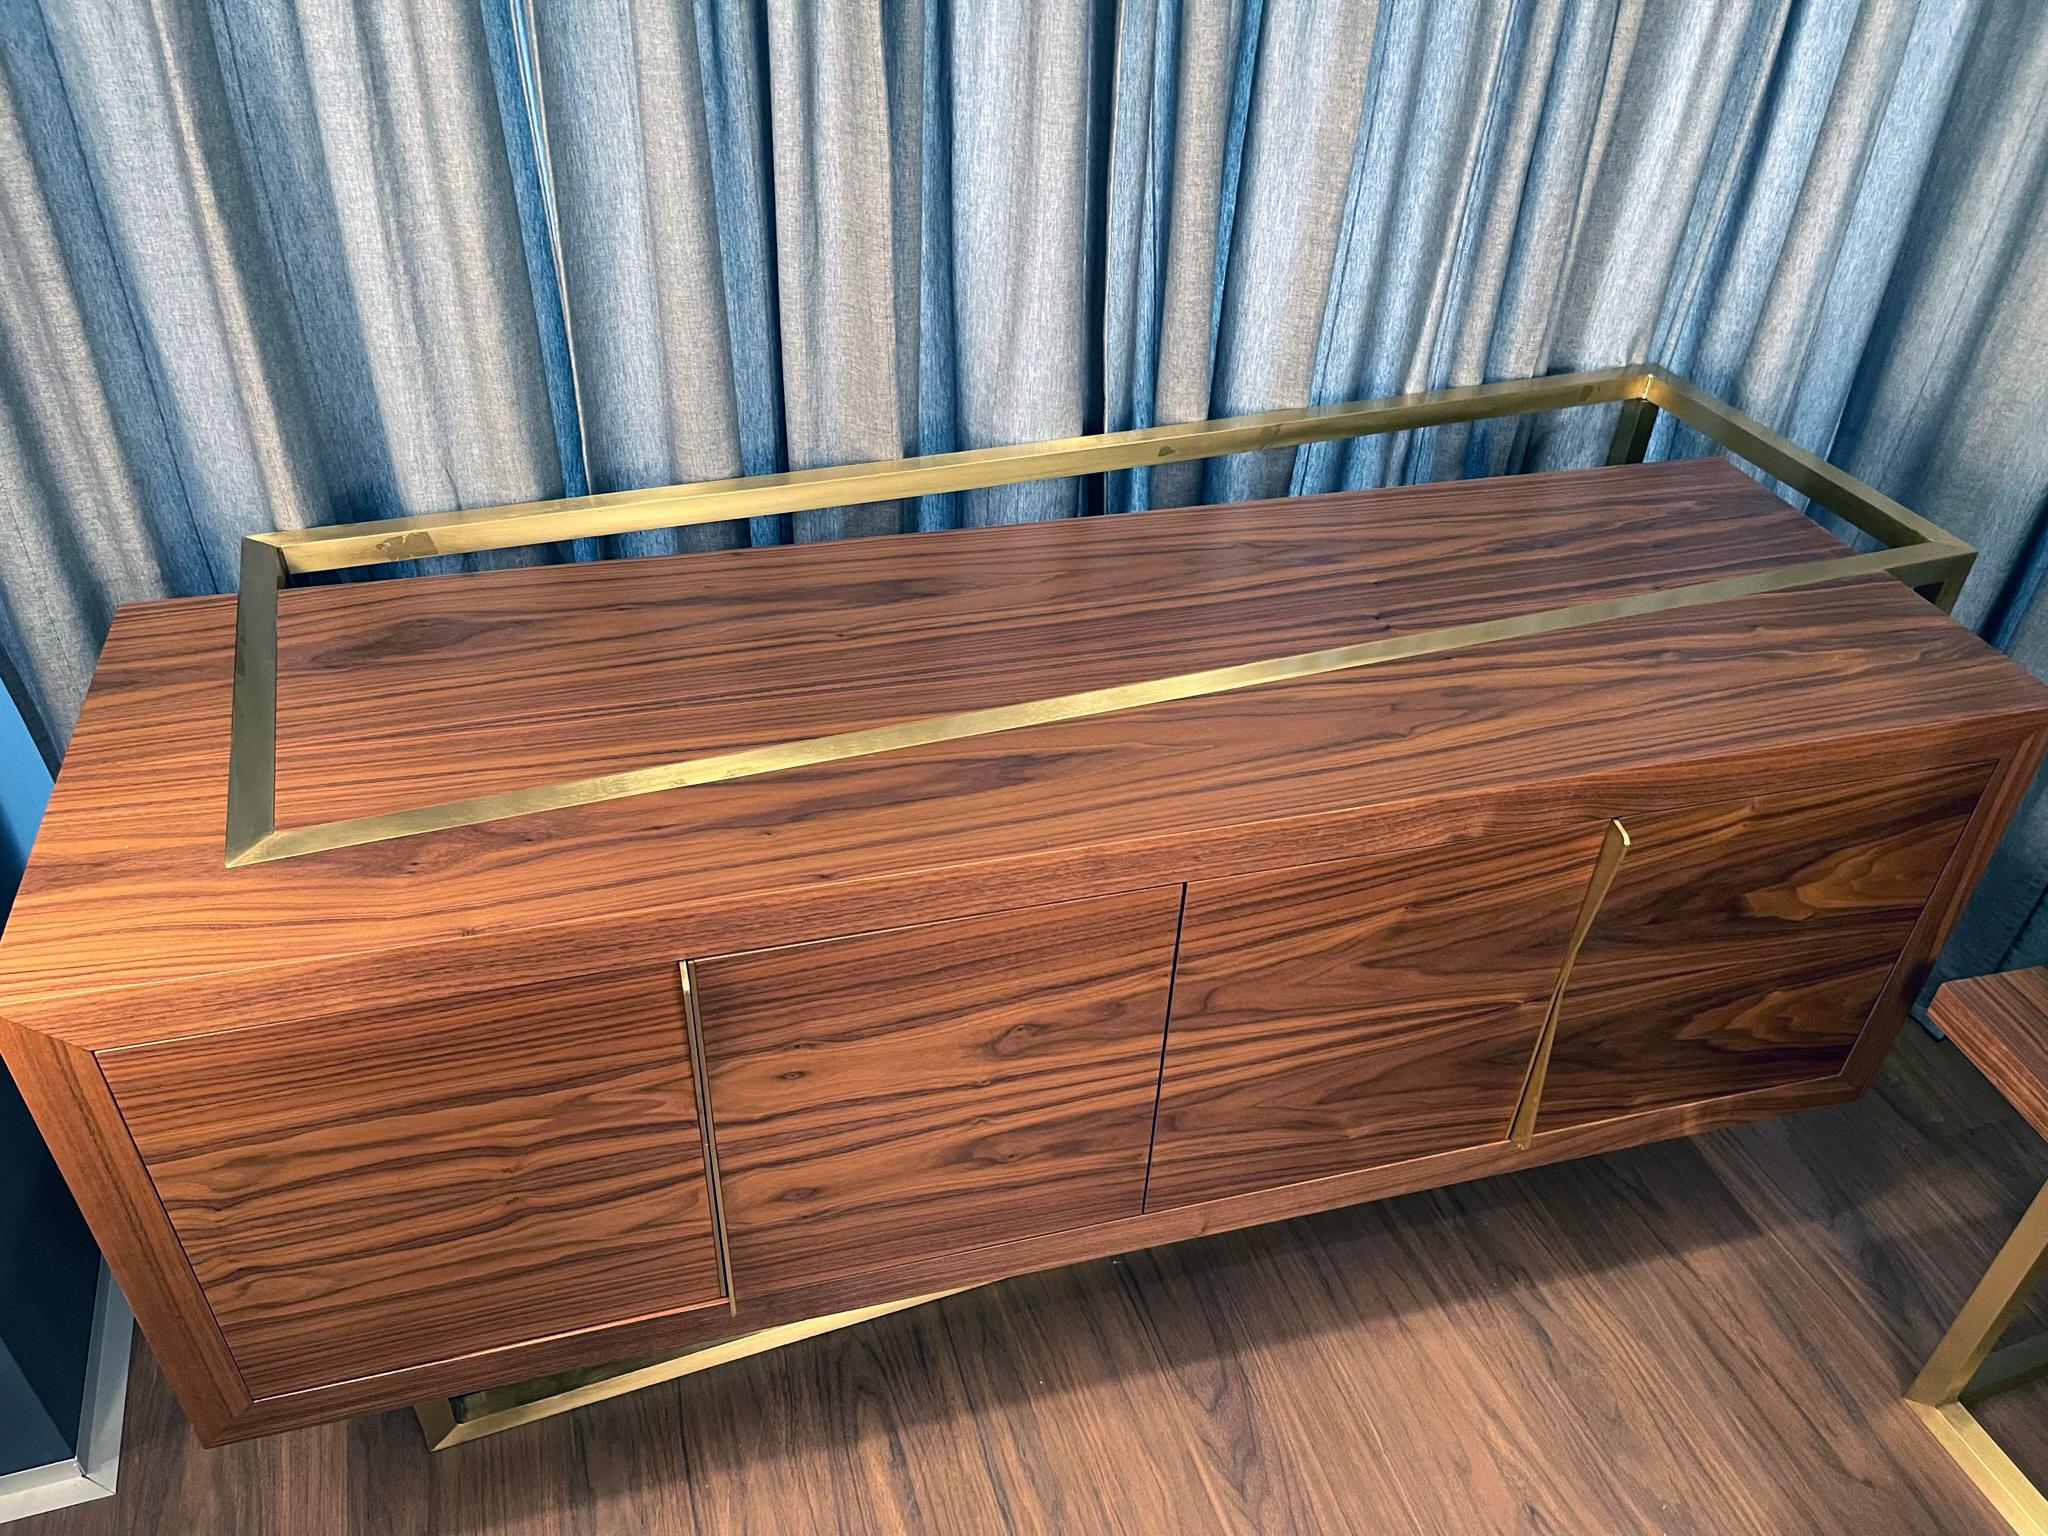 Brushed 21st Century Modern Credenza Sideboard in Walnut and Brass Showroom Sample